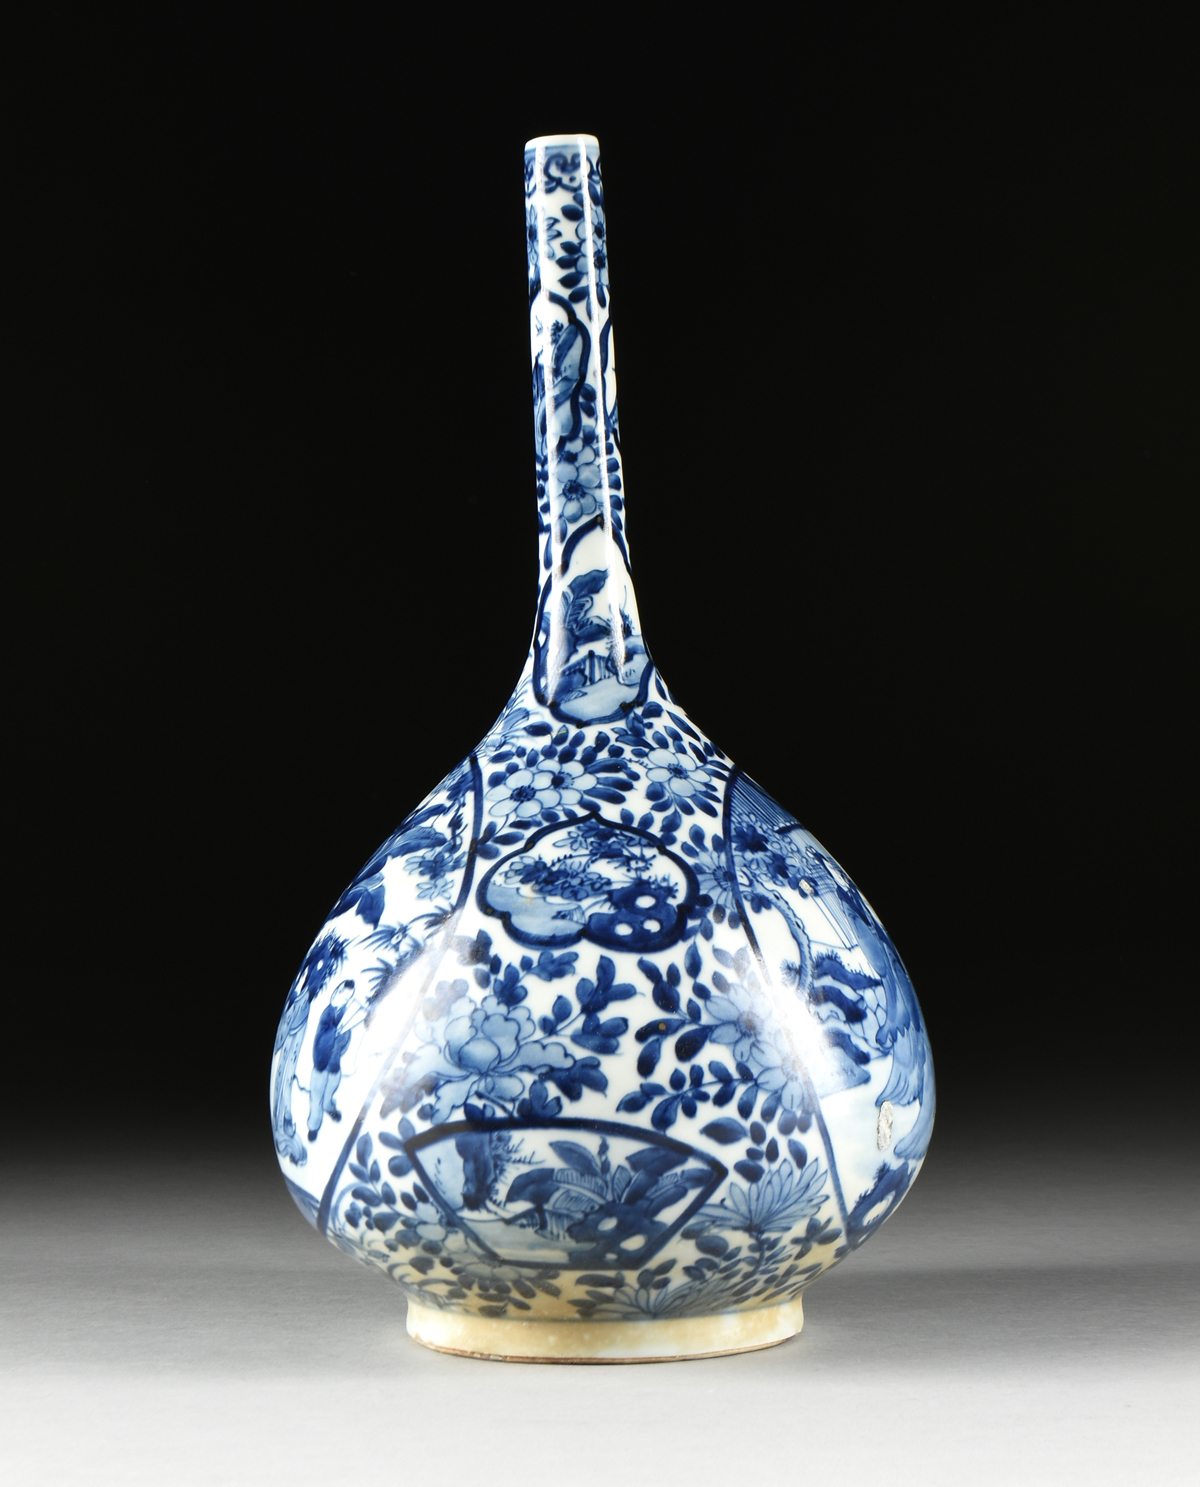 A QING DYNASTY BLUE AND WHITE PORCELAIN BOTTLE VASE, SHIPWRECK ARTIFACT, ATTRIBUTED TO THE KANGXI - Image 3 of 8